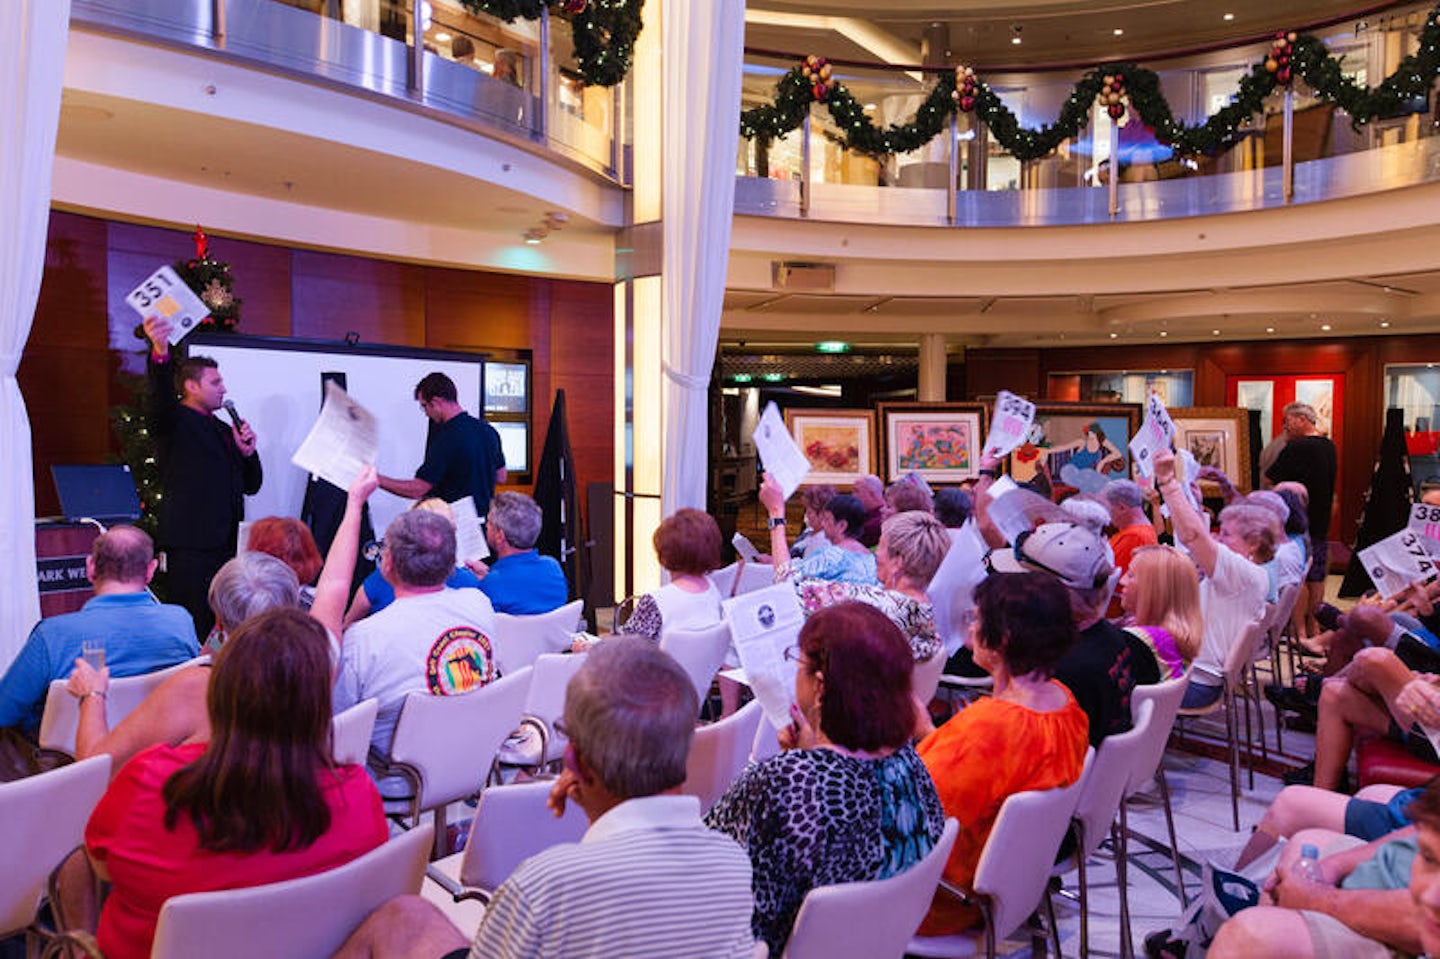 Art Auction on Celebrity Silhouette